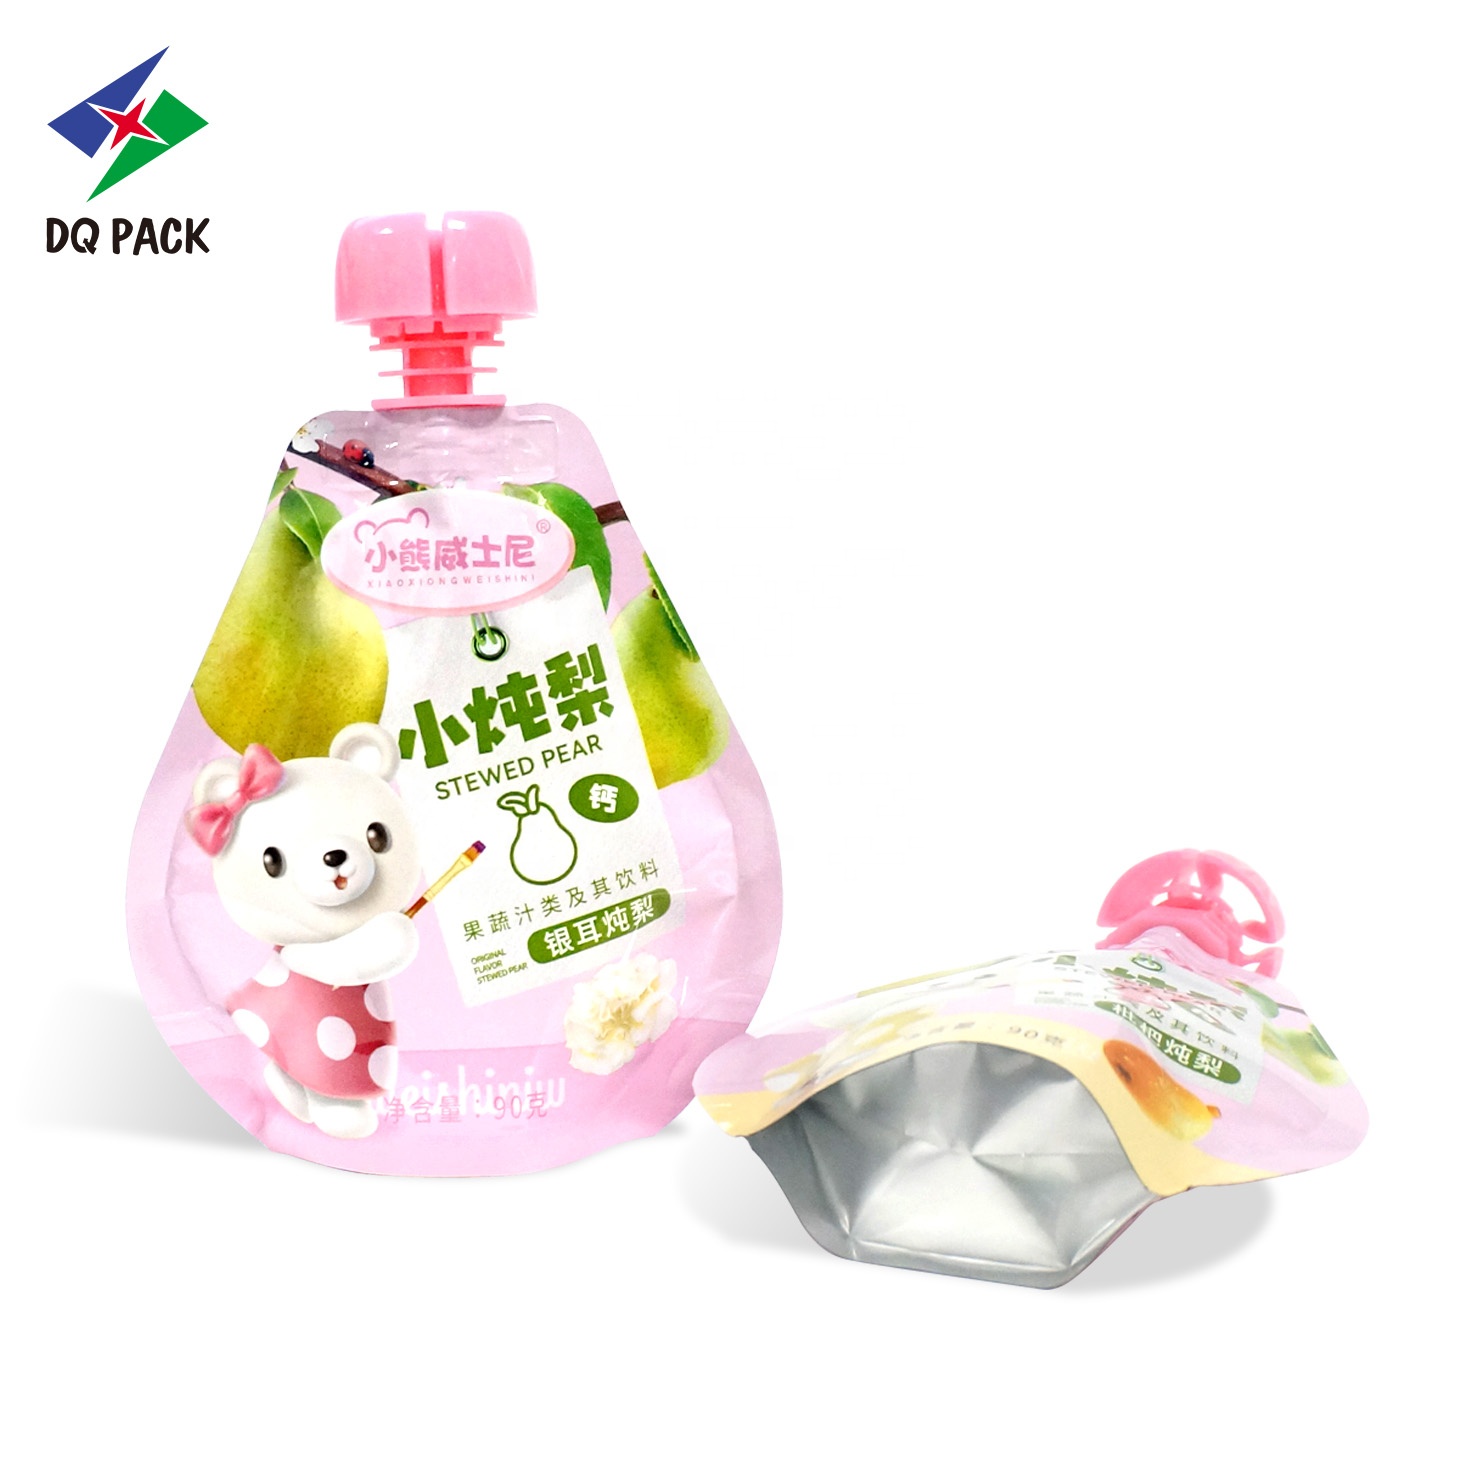 DQ PACK Guangdong lovely design Pear  shape stand up pouch with spout for Baby food fruit puree packaging